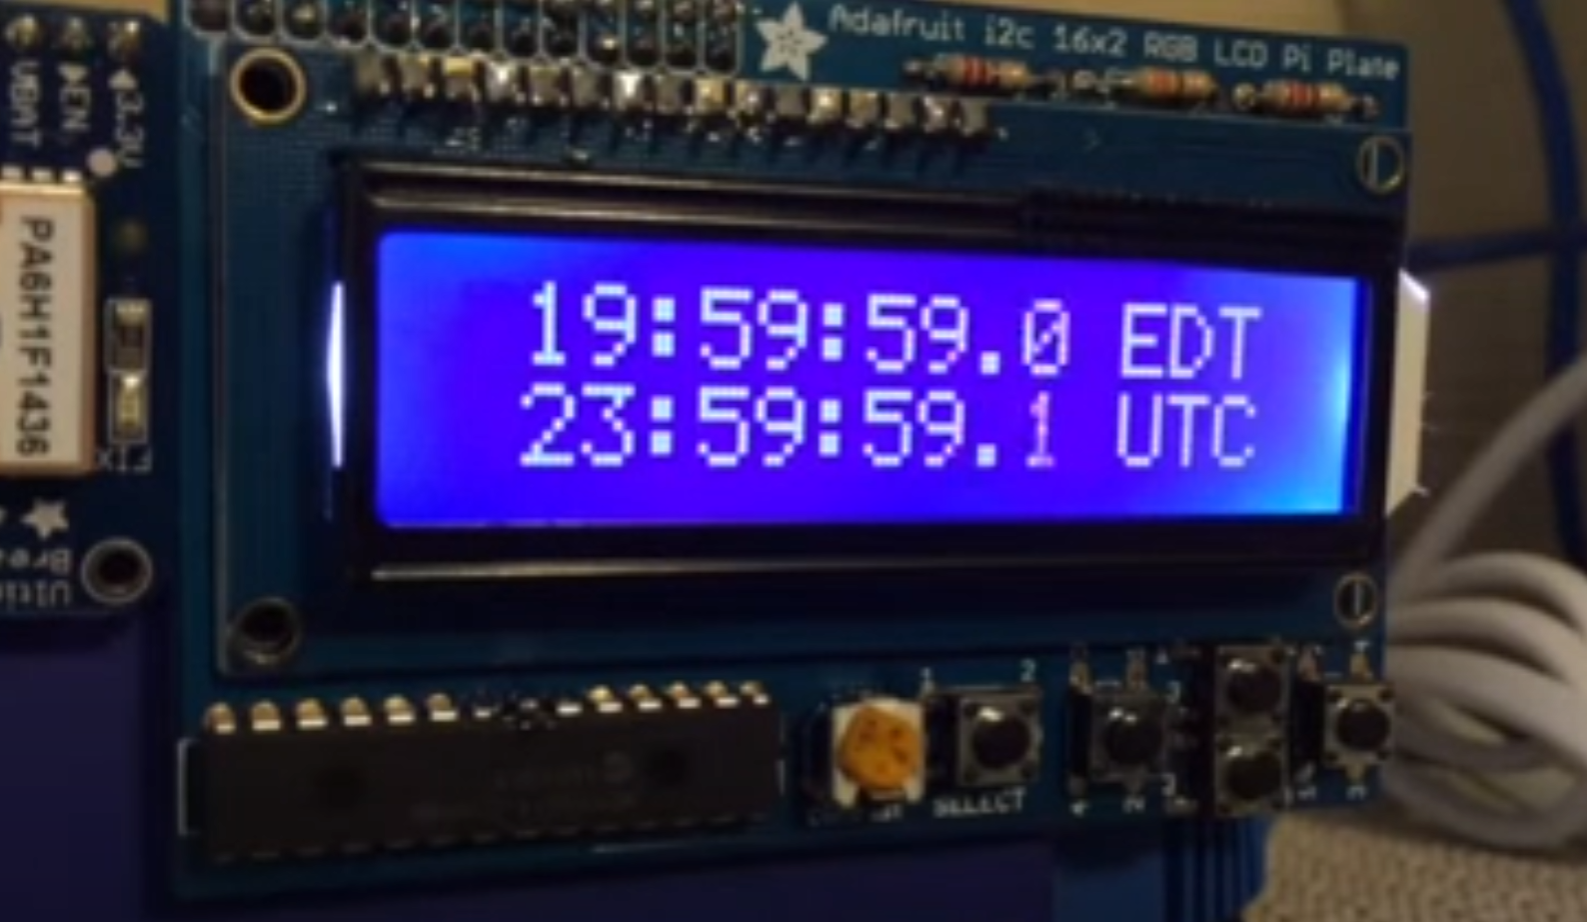 Clock showing EDT and UTC